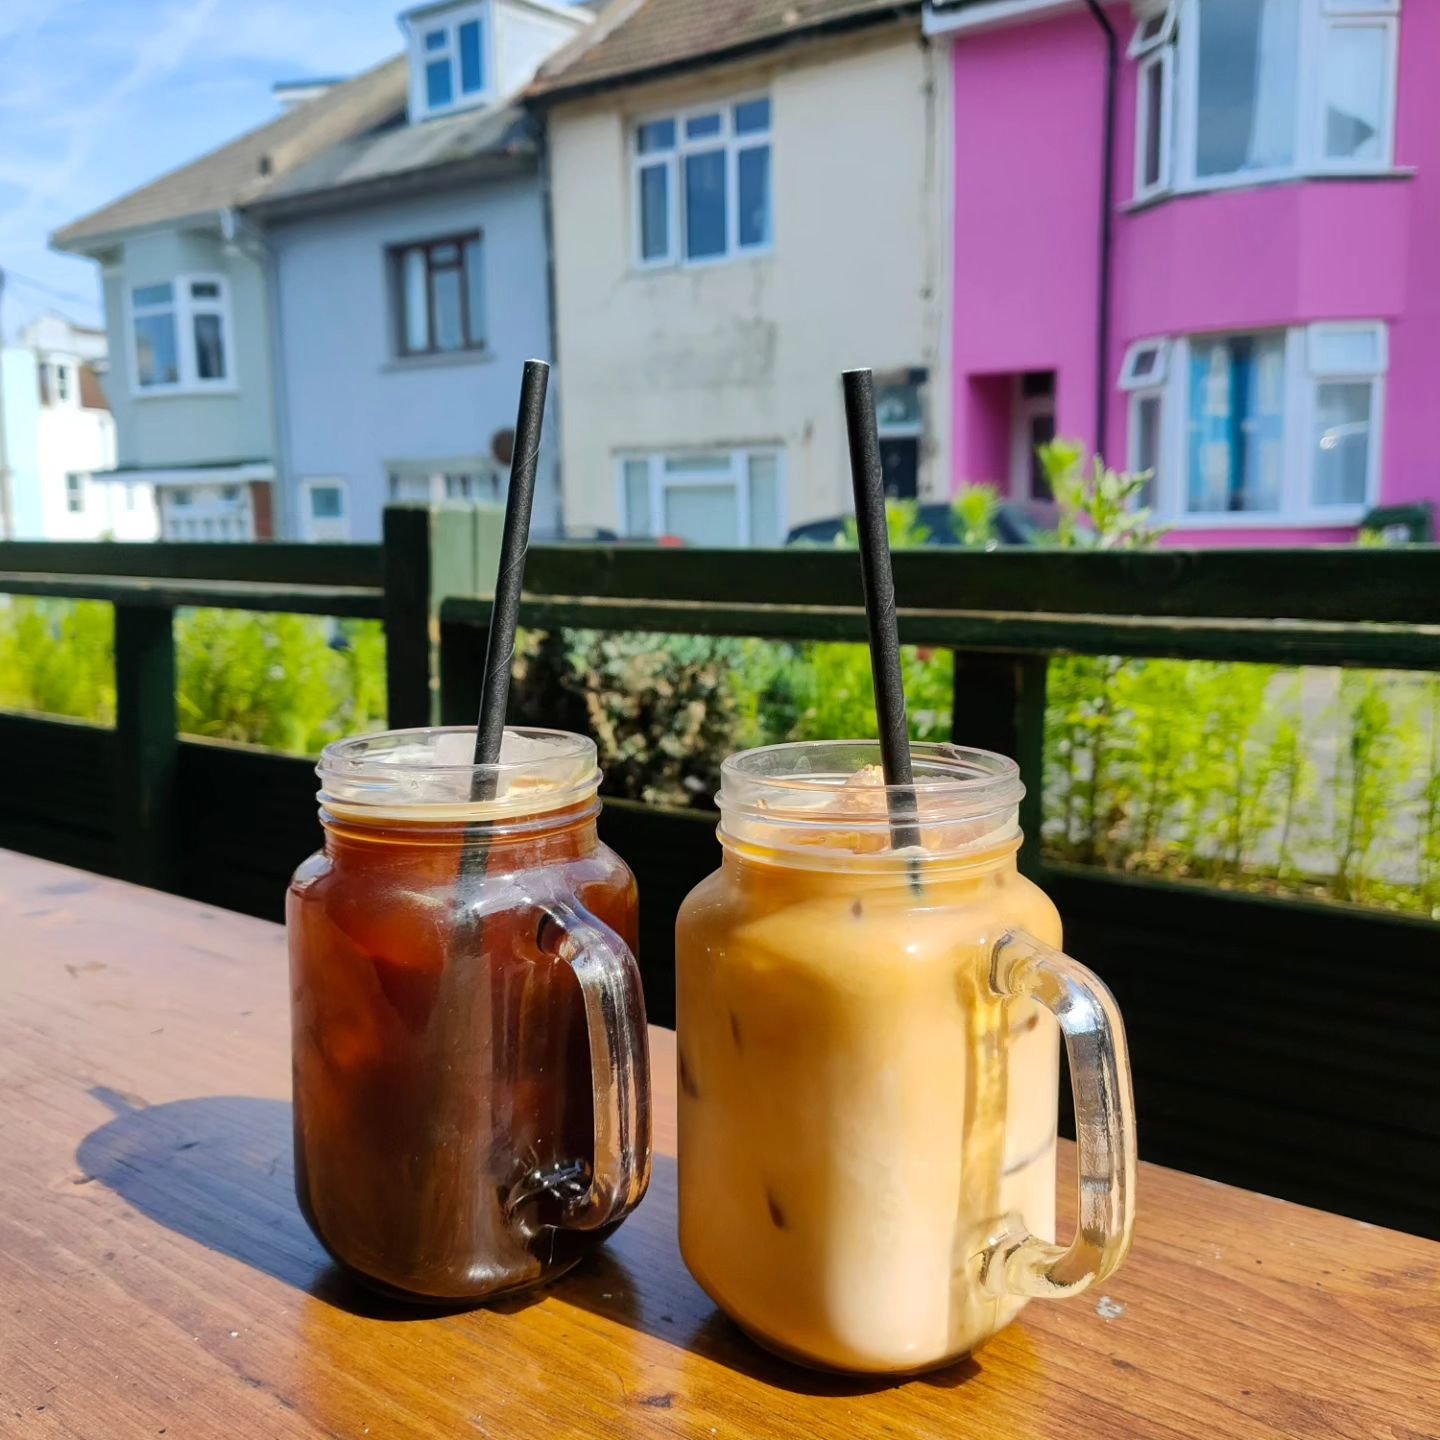 Iced coffee season is upon us and we couldn't be happier ☀️😎

With a selection of milks and syrups to make it the dream coffee on our sunny terrace

Serving brunch 8.30-3pm today and tomorrow and 9-3pm Sunday 

Join us for happy hour to catch the la